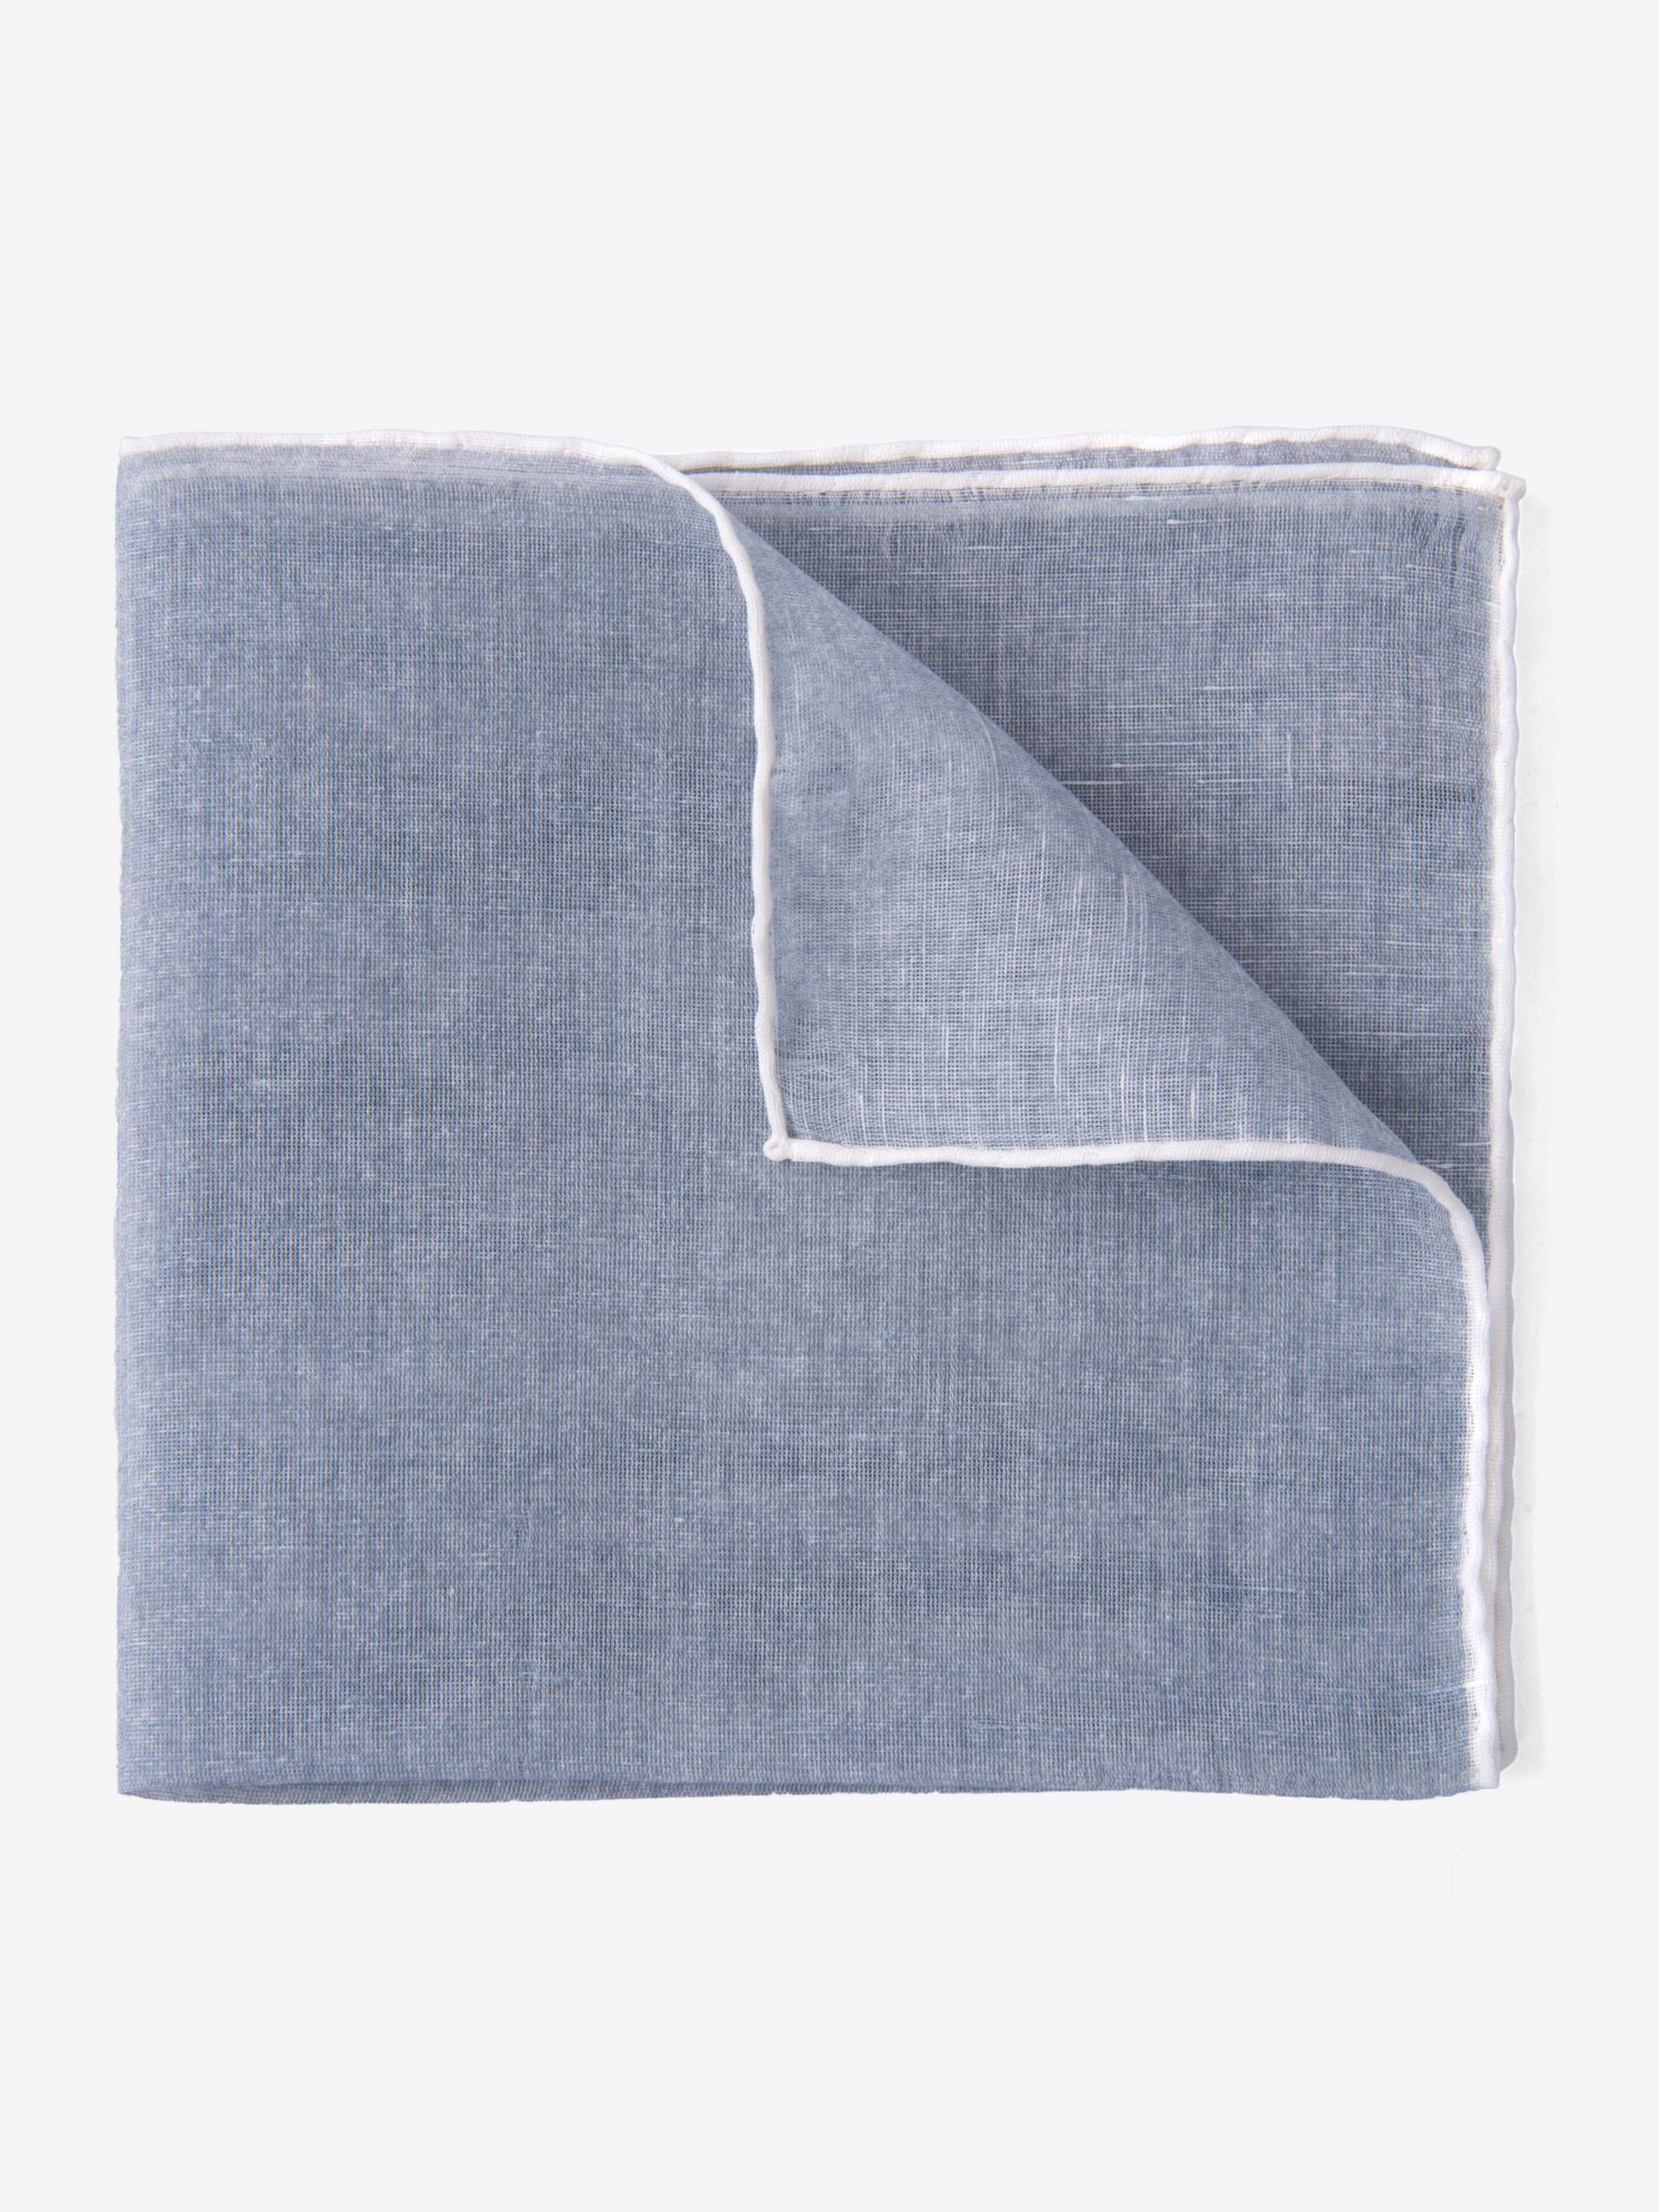 Zoom Image of Grey and White Cotton Linen Pocket Square